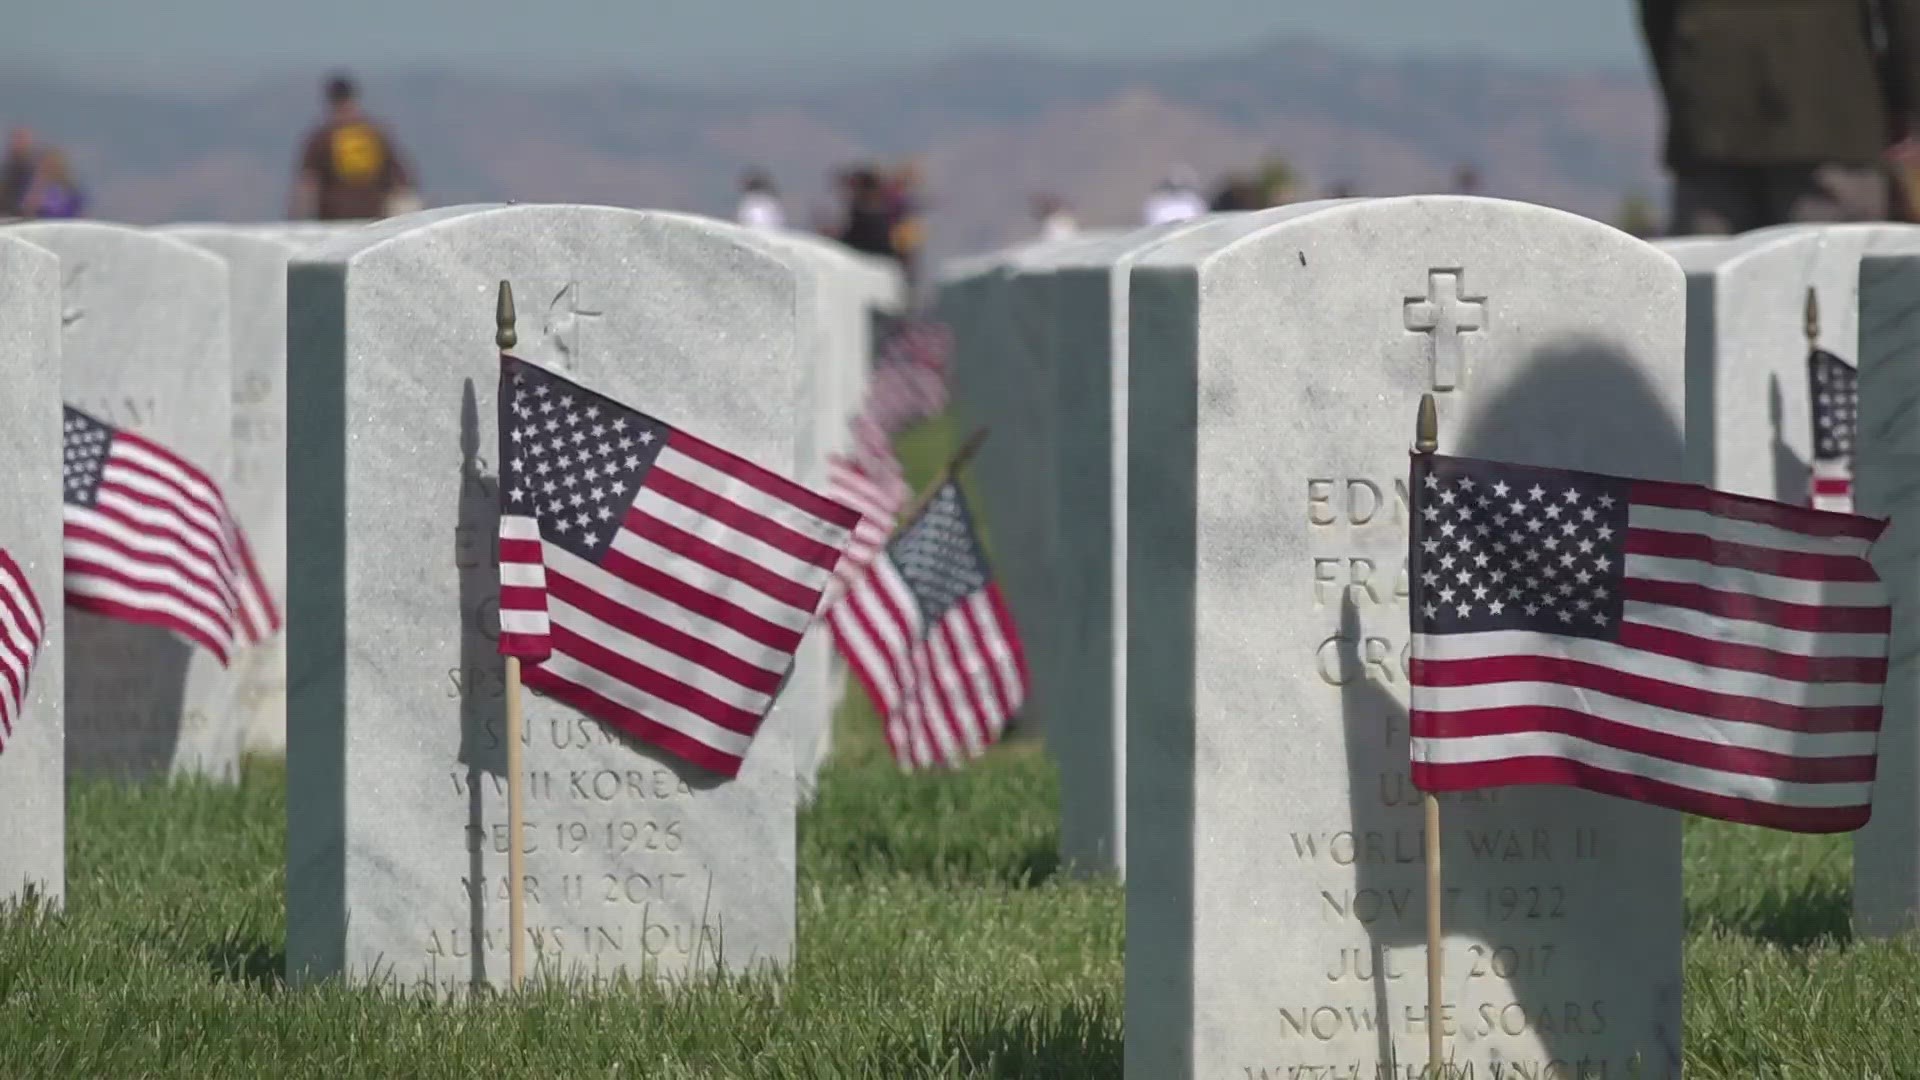 Sacramento Valley National Cemetery held an event Saturday to remember and honor those who served.